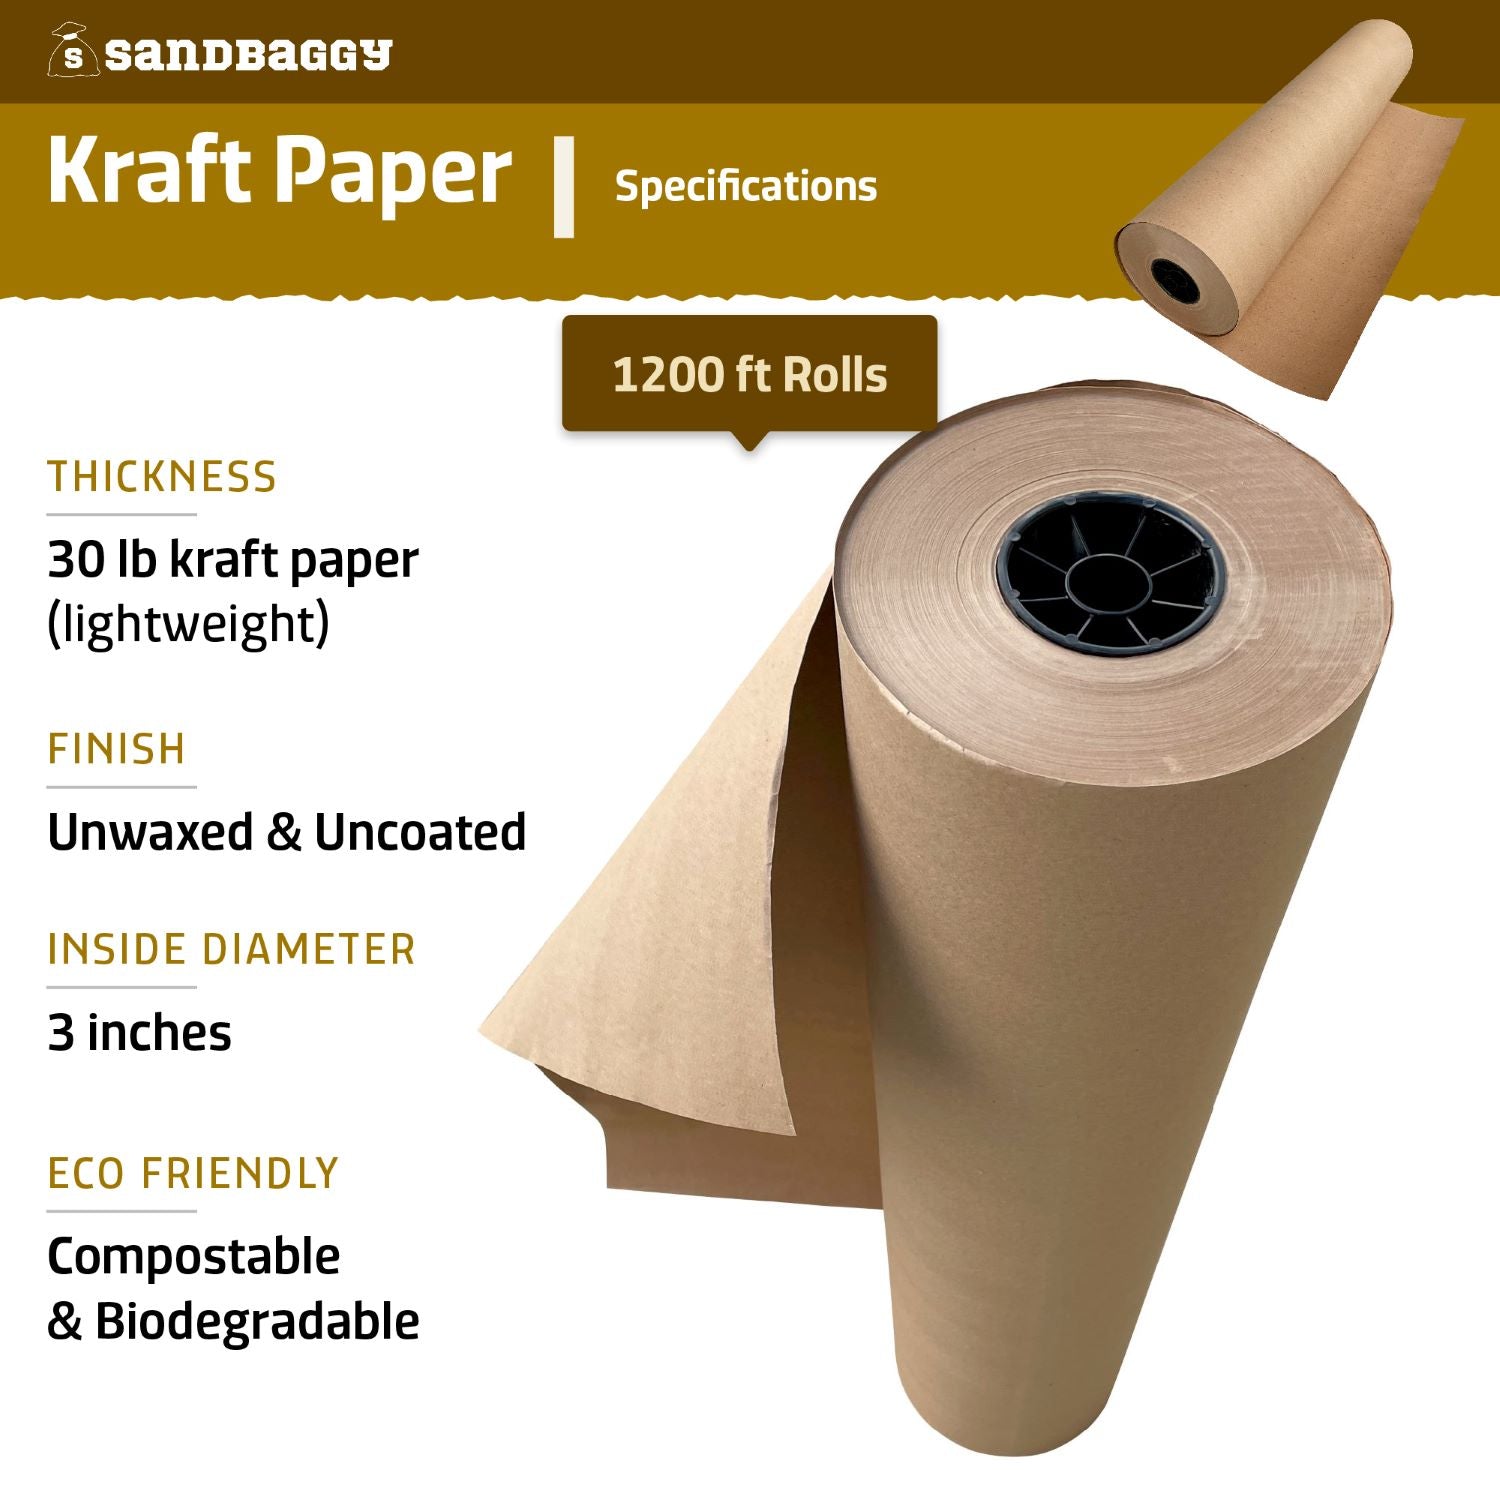 Brown roll of paper 80 centimeters, Length 25 meters Eco water resistant., For sale per piece, Fast delivery 